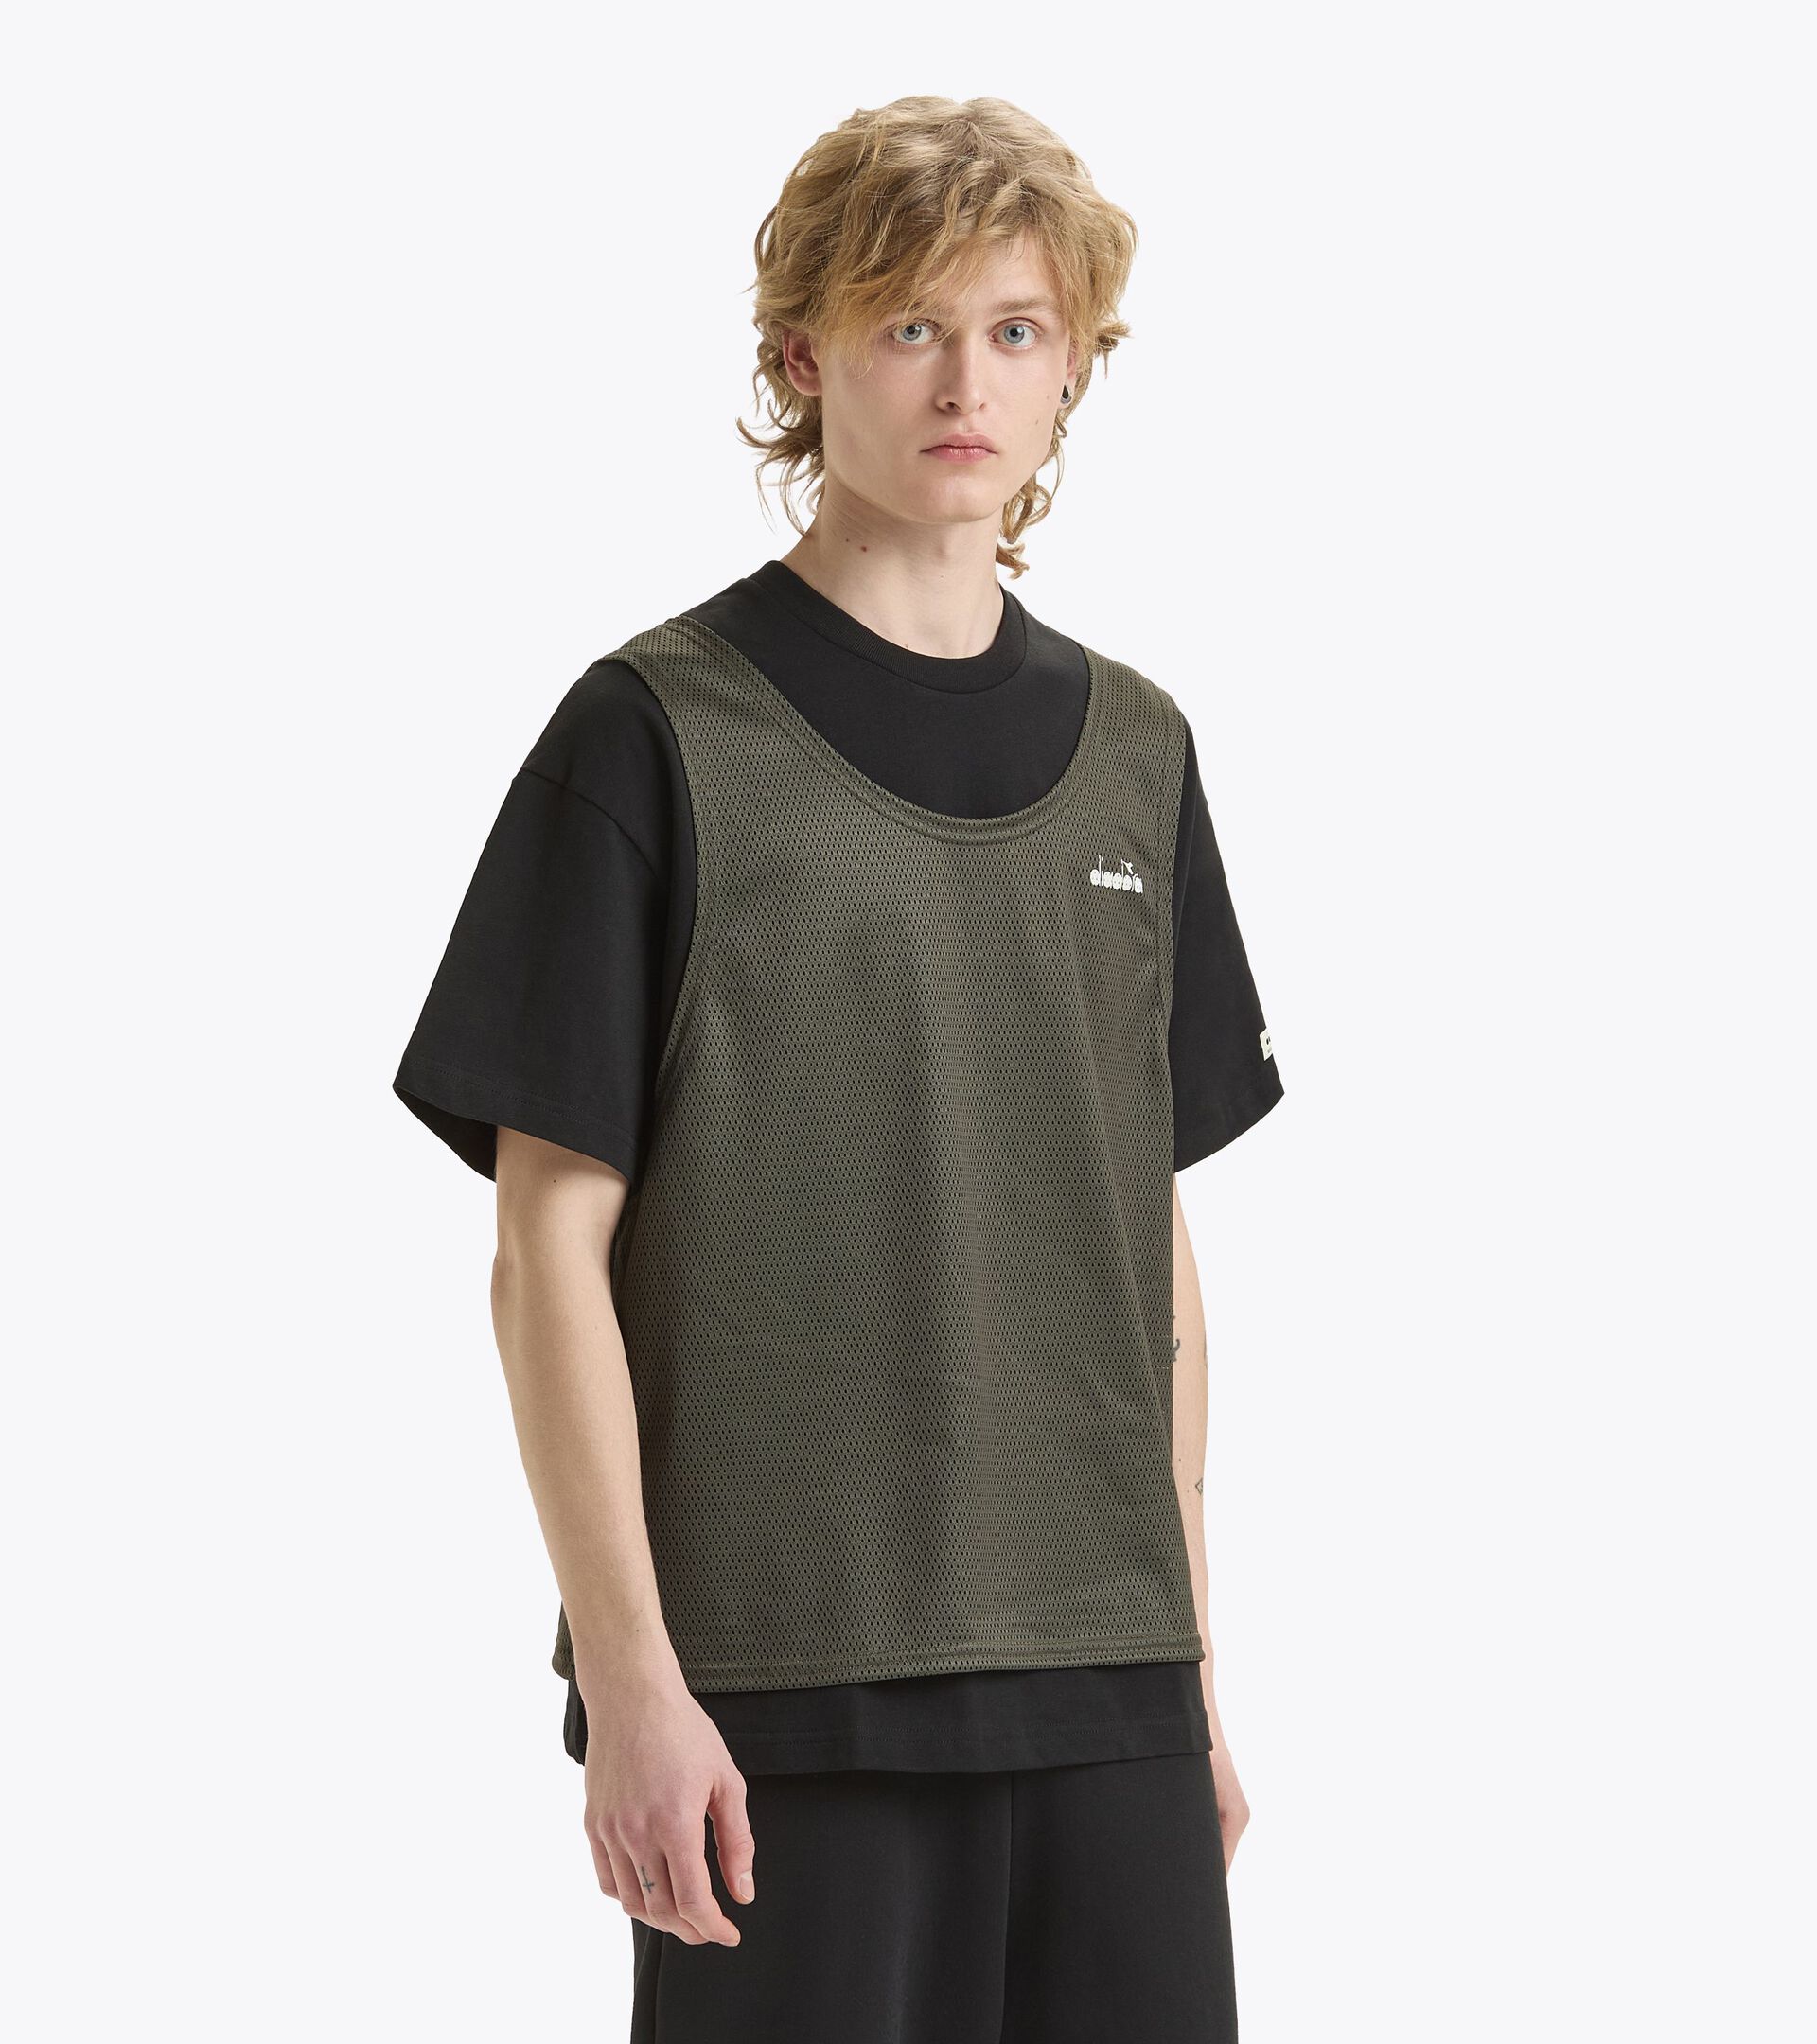 T-shirt and tank top combo - Made in Italy - Gender Neutral
 T-SHIRT SS 2-IN-1 LEGACY KIWI GREEN - Diadora